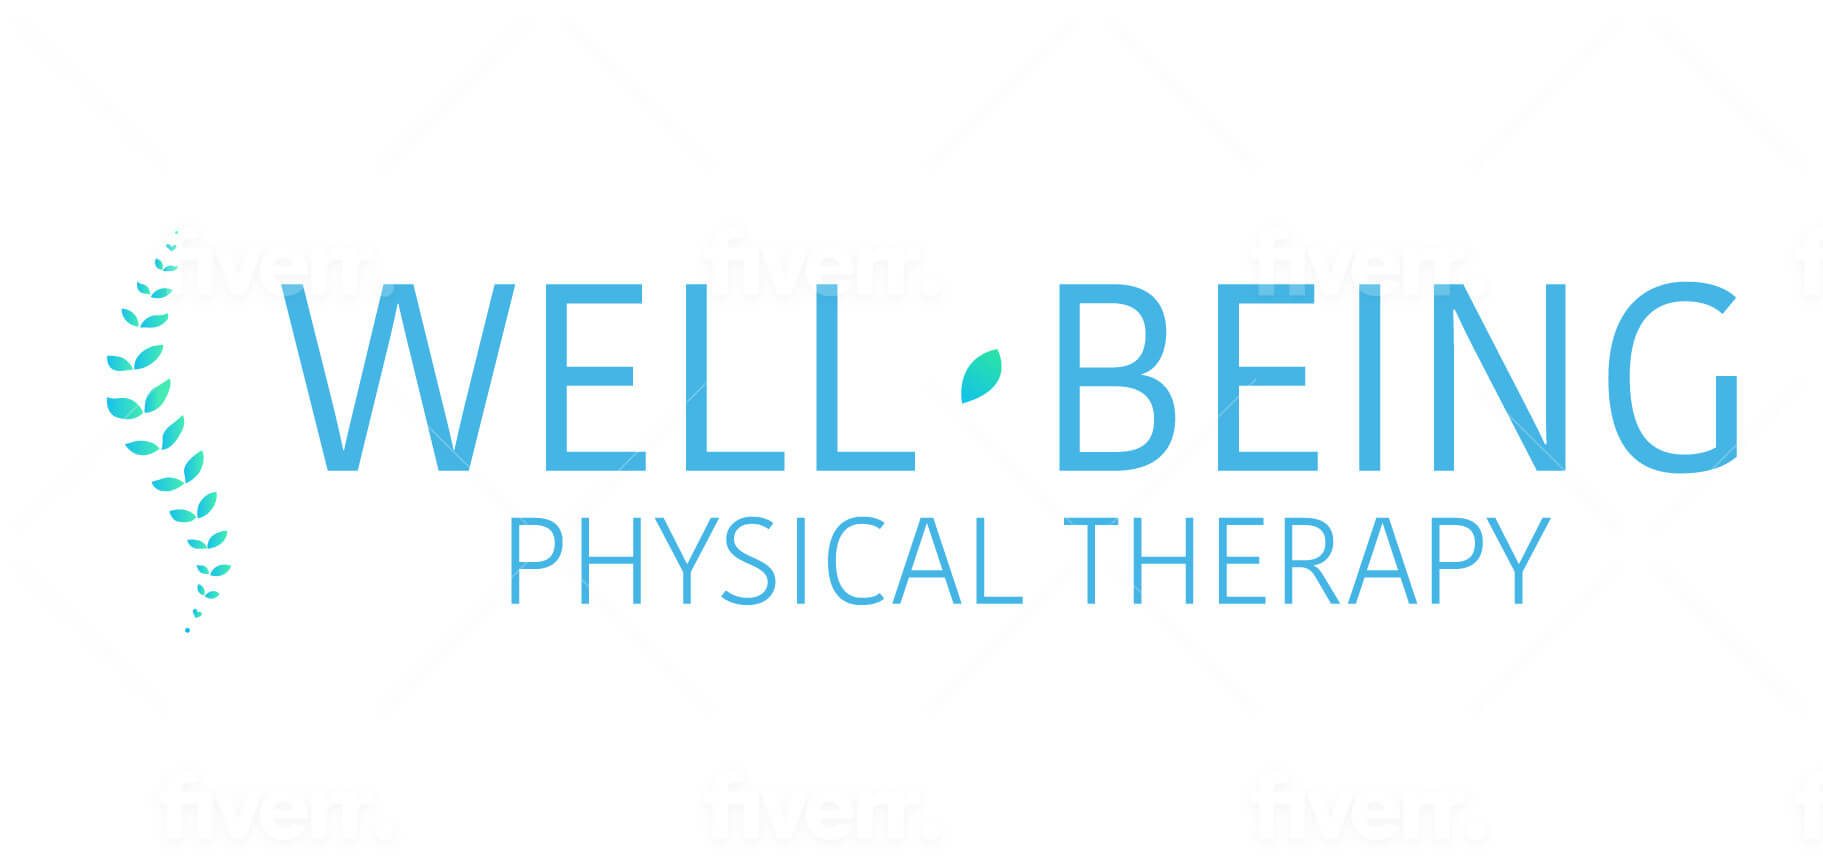 Winner Image - Well Being Physical Therapy